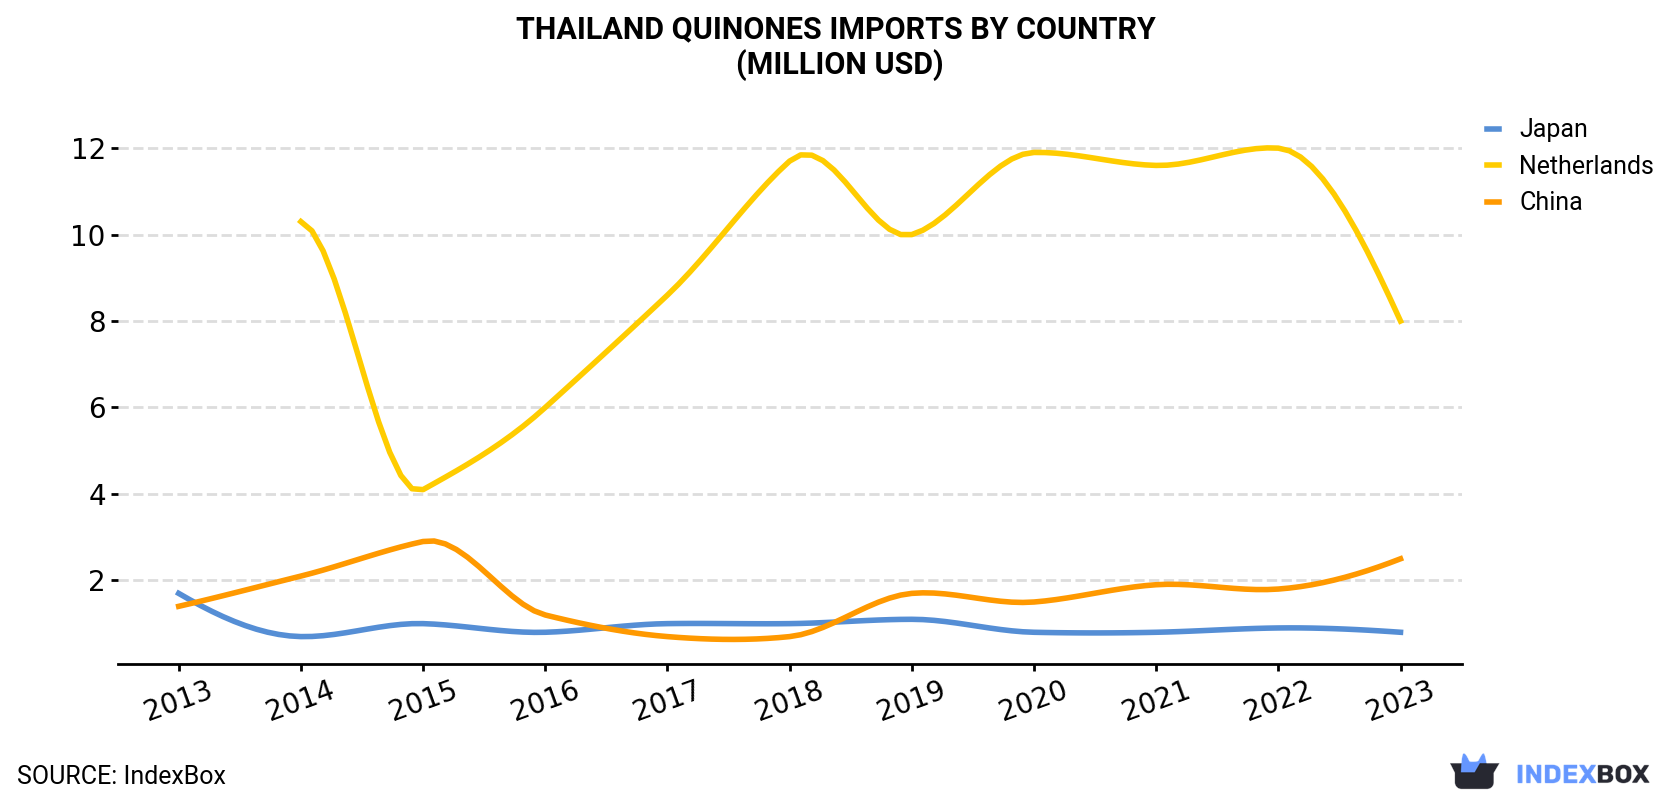 Thailand Quinones Imports By Country (Million USD)